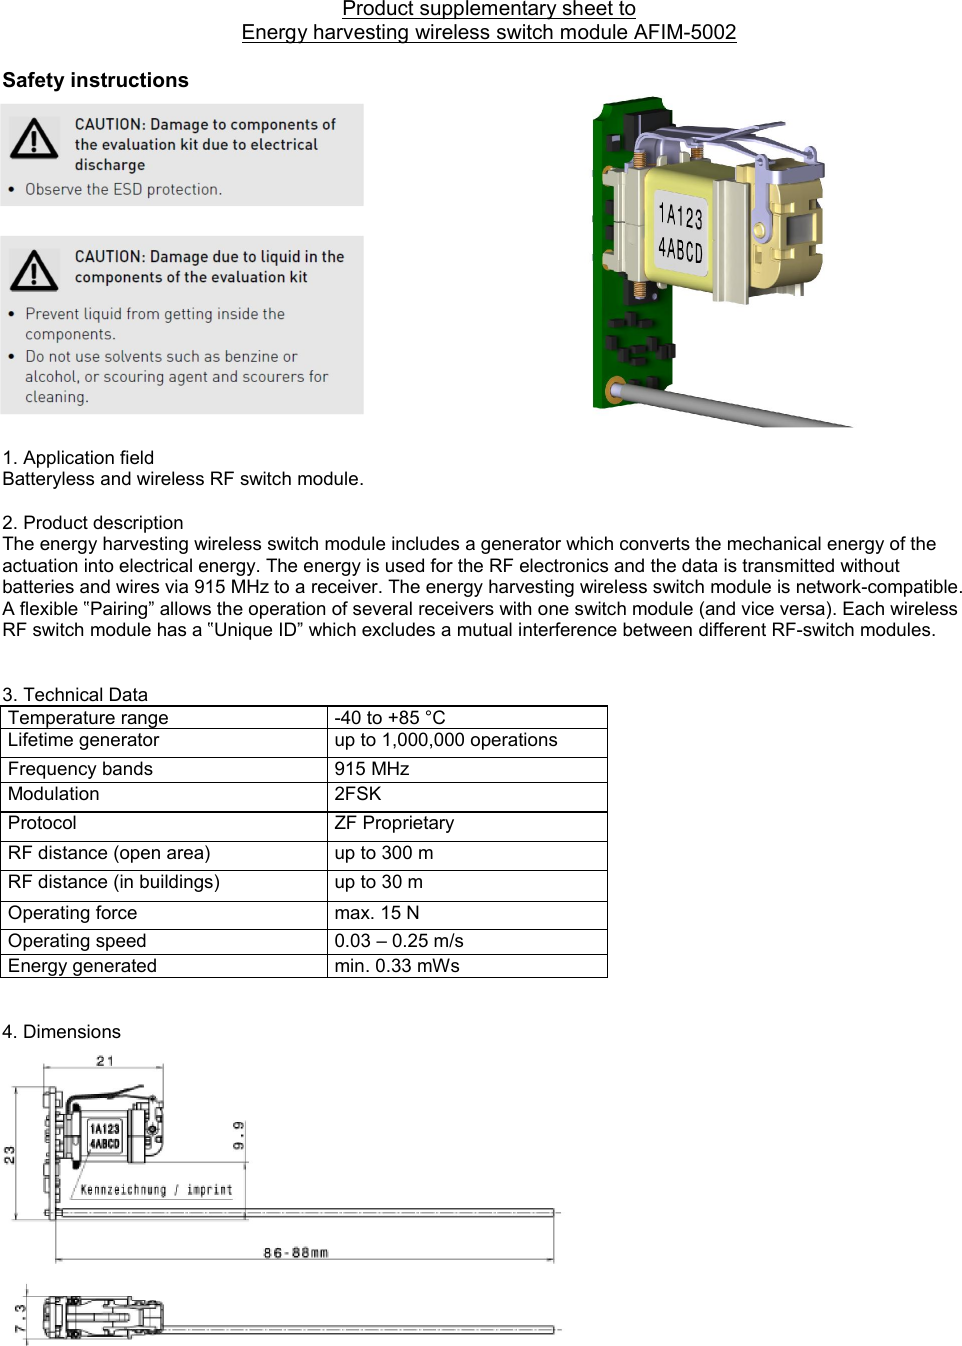 Product supplementary sheet to  Energy harvesting wireless switch module AFIM-5002  Safety instructions                1. Application field  Batteryless and wireless RF switch module.     2. Product description The energy harvesting wireless switch module includes a generator which converts the mechanical energy of the actuation into electrical energy. The energy is used for the RF electronics and the data is transmitted without batteries and wires via 915 MHz to a receiver. The energy harvesting wireless switch module is network-compatible. A flexible ‟Pairing” allows the operation of several receivers with one switch module (and vice versa). Each wireless RF switch module has a ‟Unique ID” which excludes a mutual interference between different RF-switch modules.   3. Technical Data                Temperature range  -40 to +85 °C Lifetime generator  up to 1,000,000 operations Frequency bands  915 MHz  Modulation  2FSK Protocol  ZF Proprietary RF distance (open area)  up to 300 m RF distance (in buildings)  up to 30 m                  Operating force  max. 15 N Operating speed  0.03 – 0.25 m/s Energy generated  min. 0.33 mWs   4. Dimensions                    